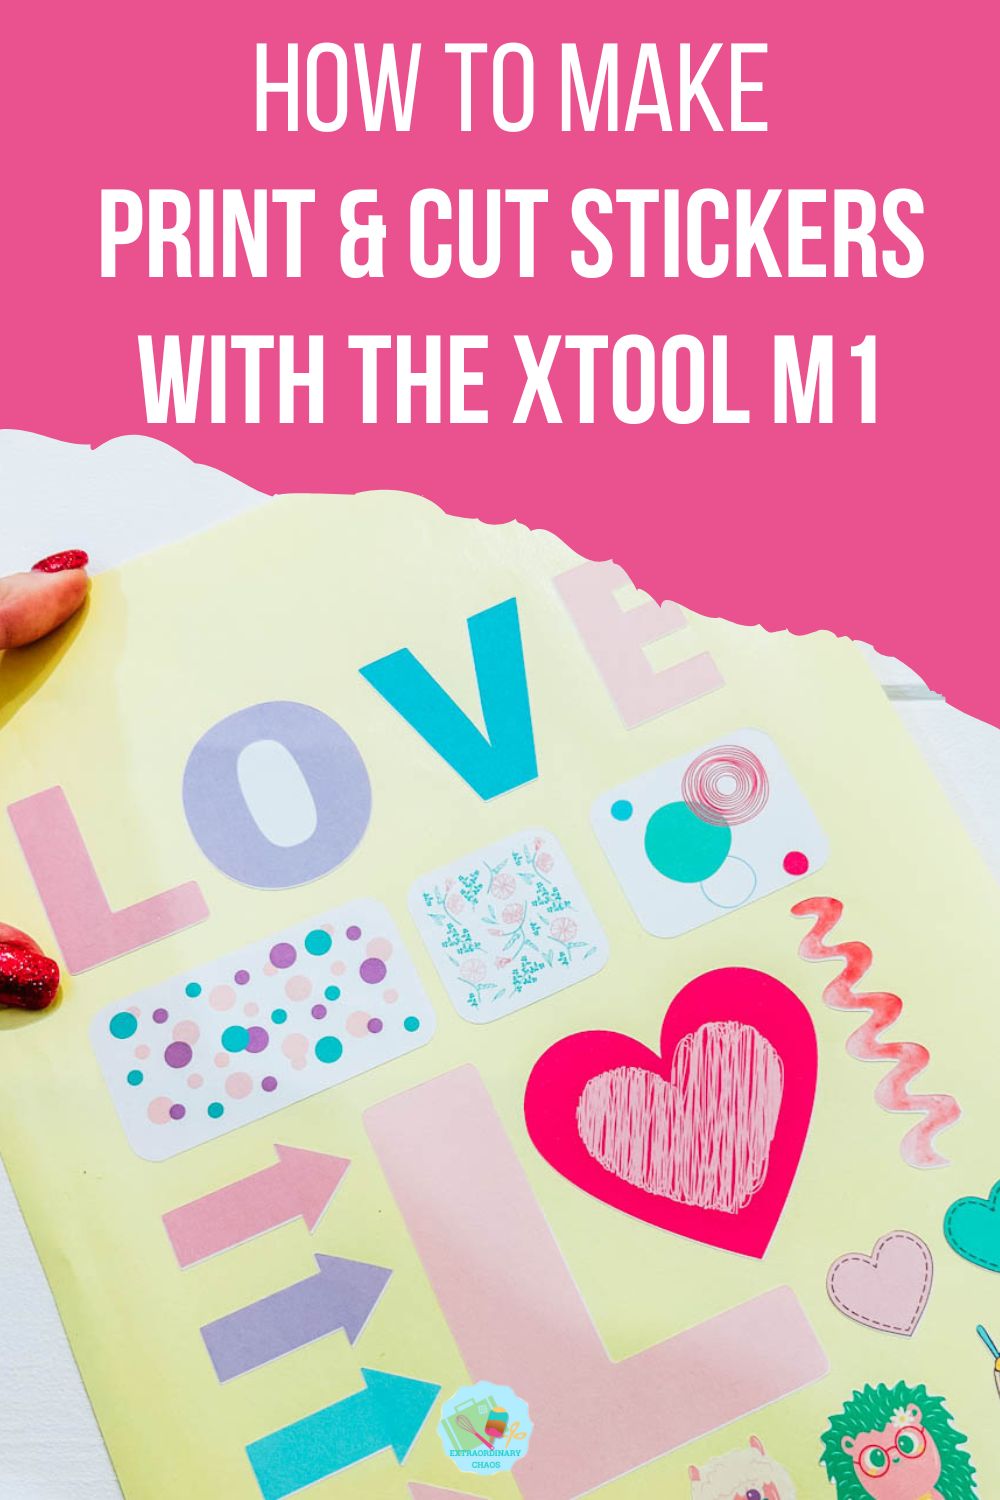 How to make print and cut stickers with the XTool M1